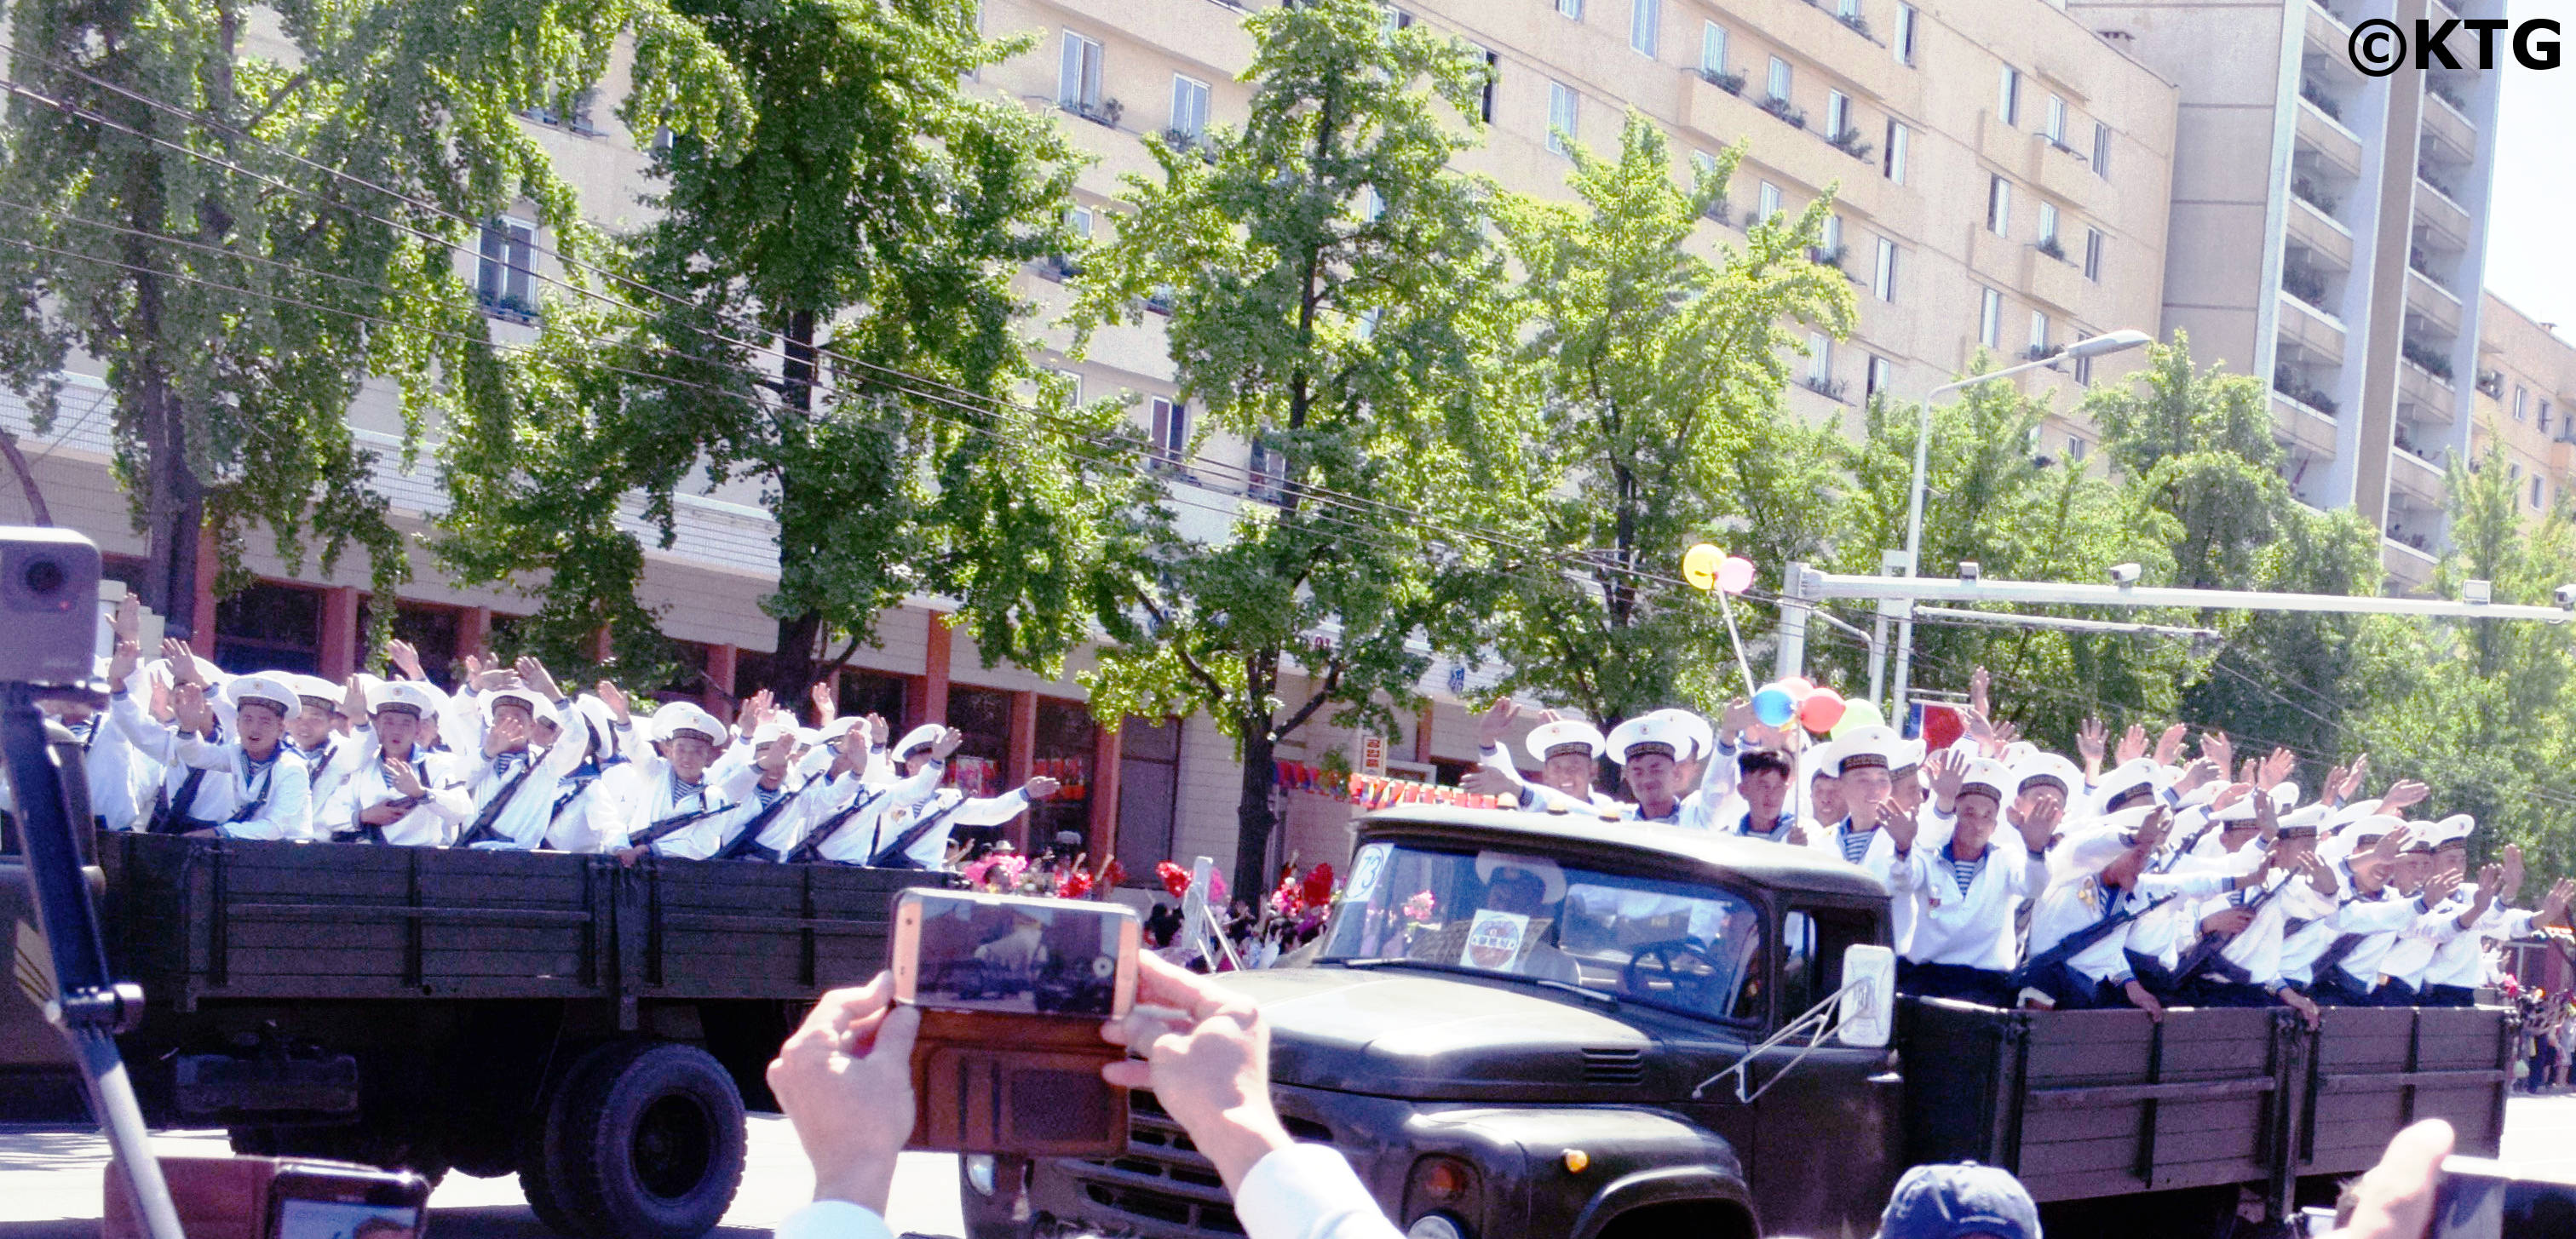 North Korean navy in a military parade. KTG Tours